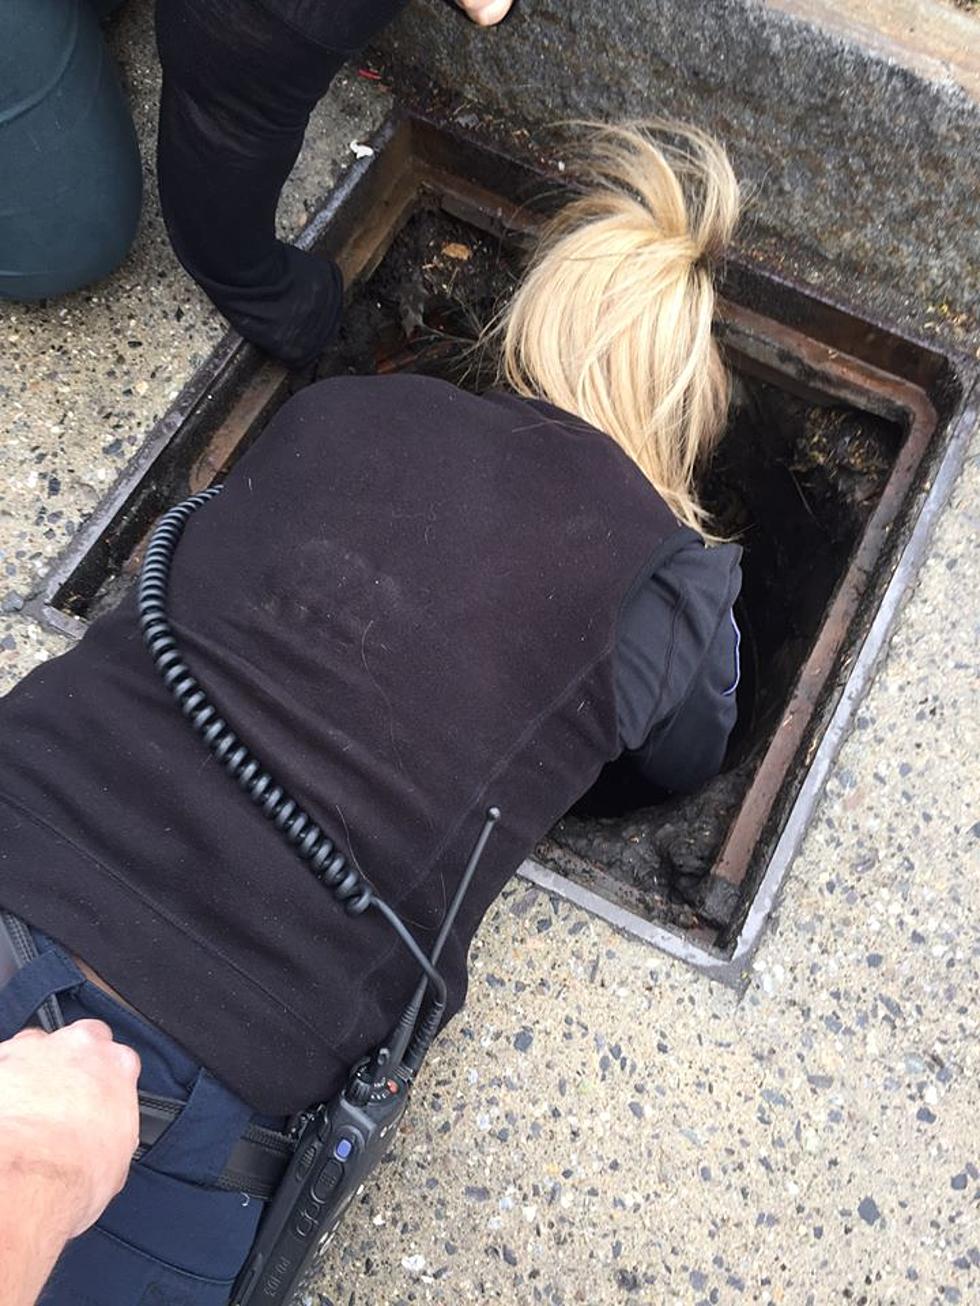 See Pics: Portland Police Officer Saves a Duckling from a Sewer